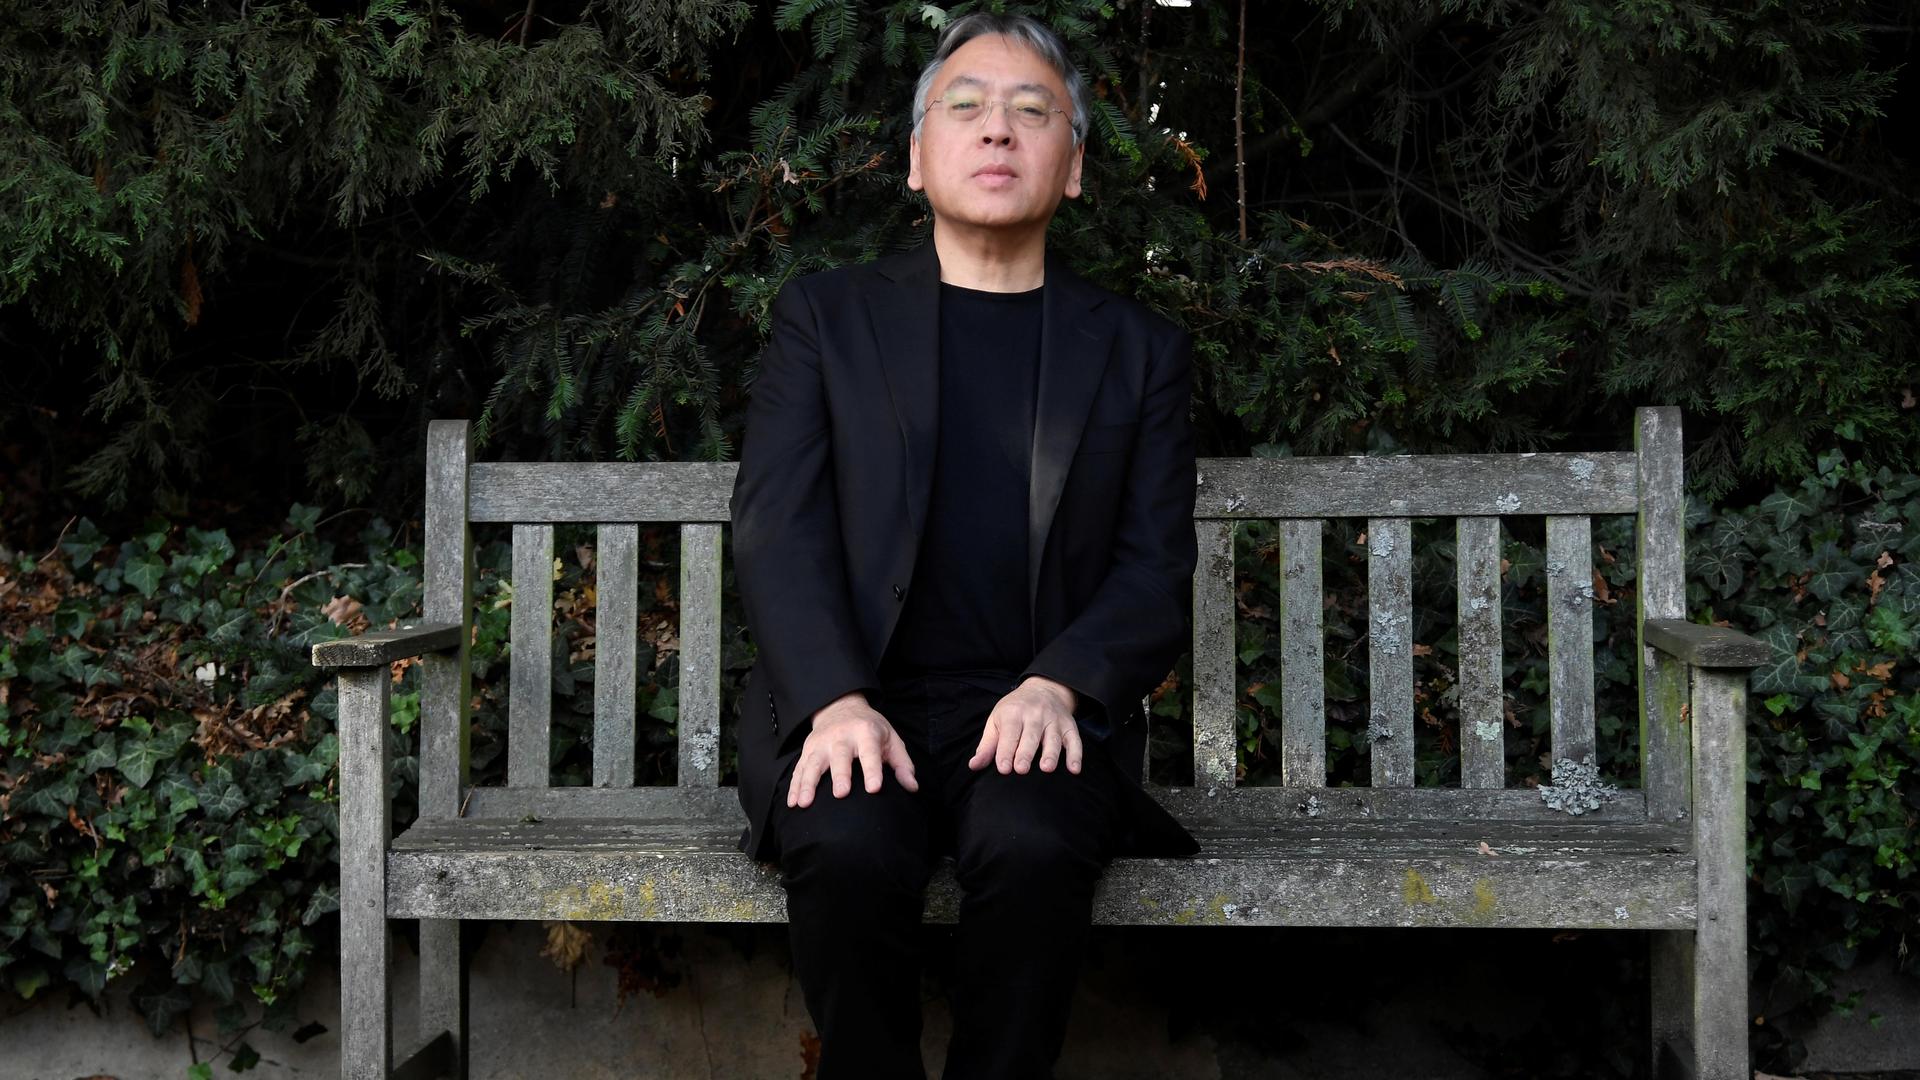 Author Kazuo Ishiguro poses for the media outside his home, following the announcement that he has won the Nobel Prize for Literature, in London, Britain, on Oct. 5, 2017.